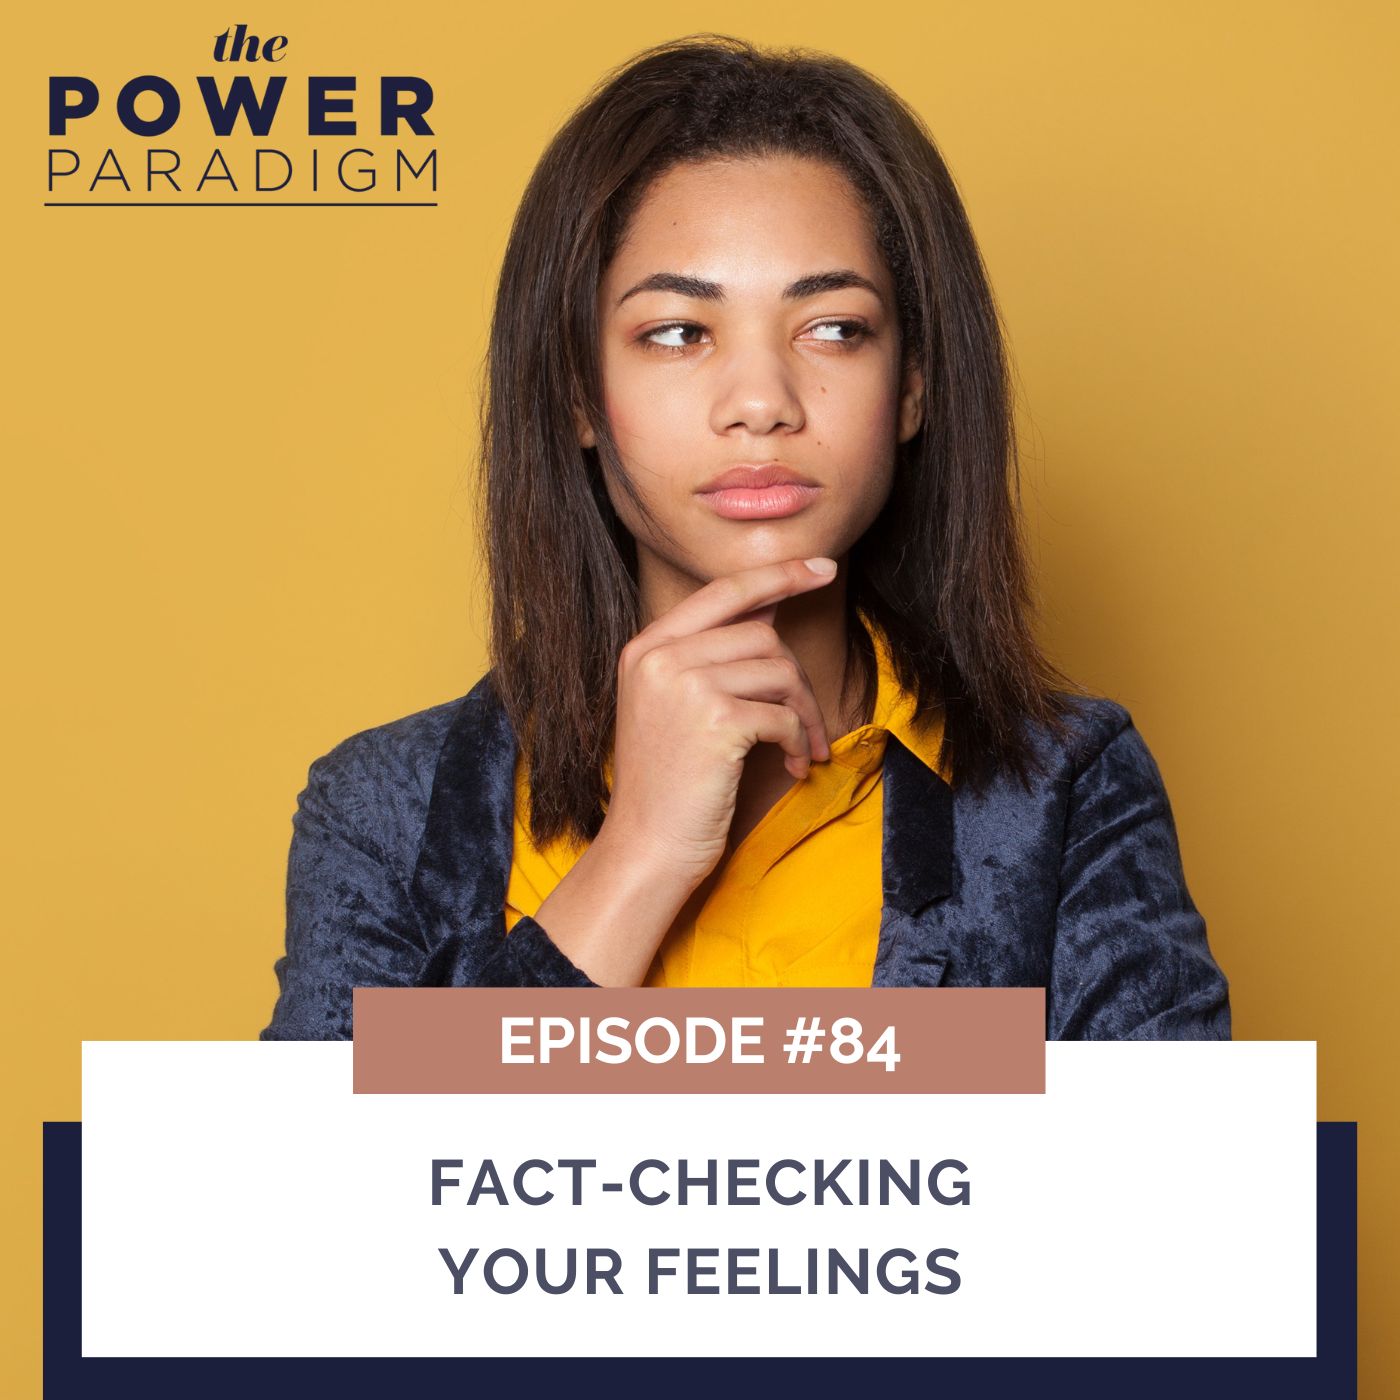 The Power Paradigm™ | Fact-Checking Your Feelings